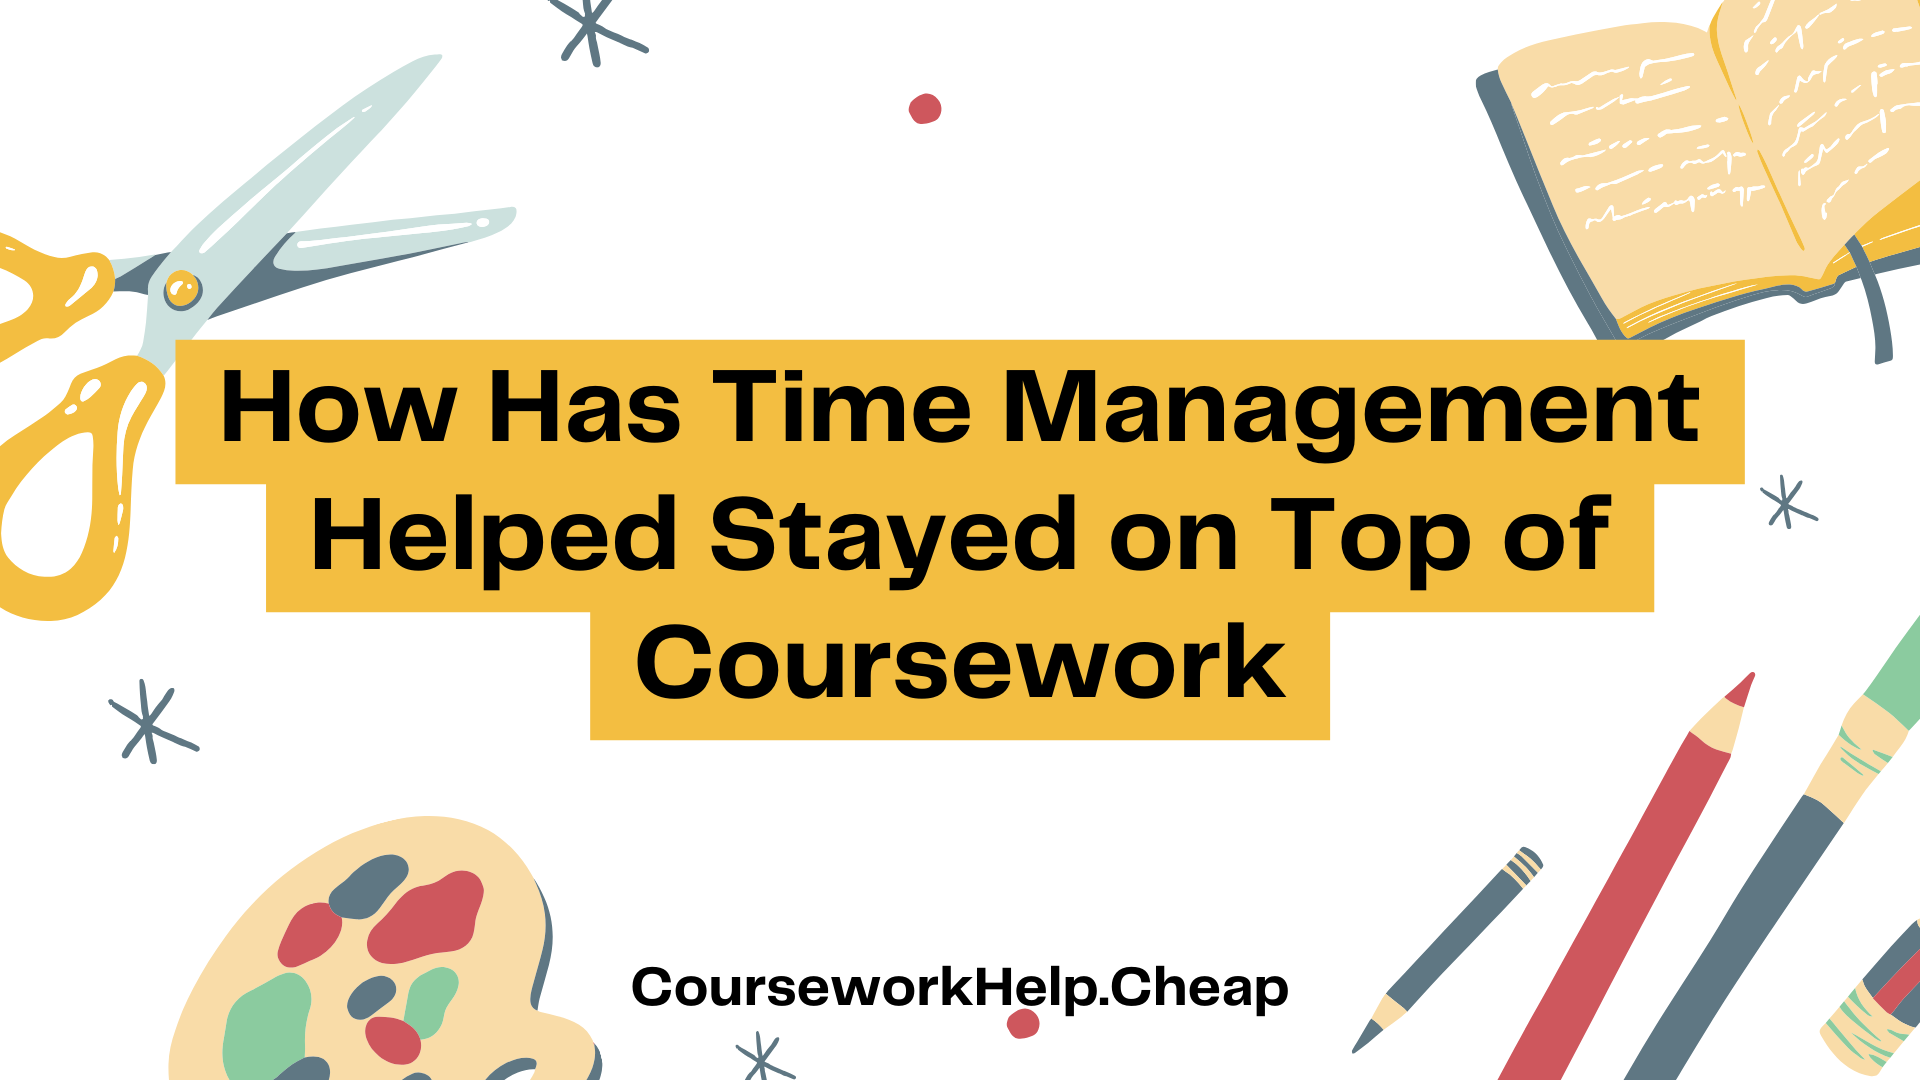 How Has Time Management Helped Stayed on Top of Coursework